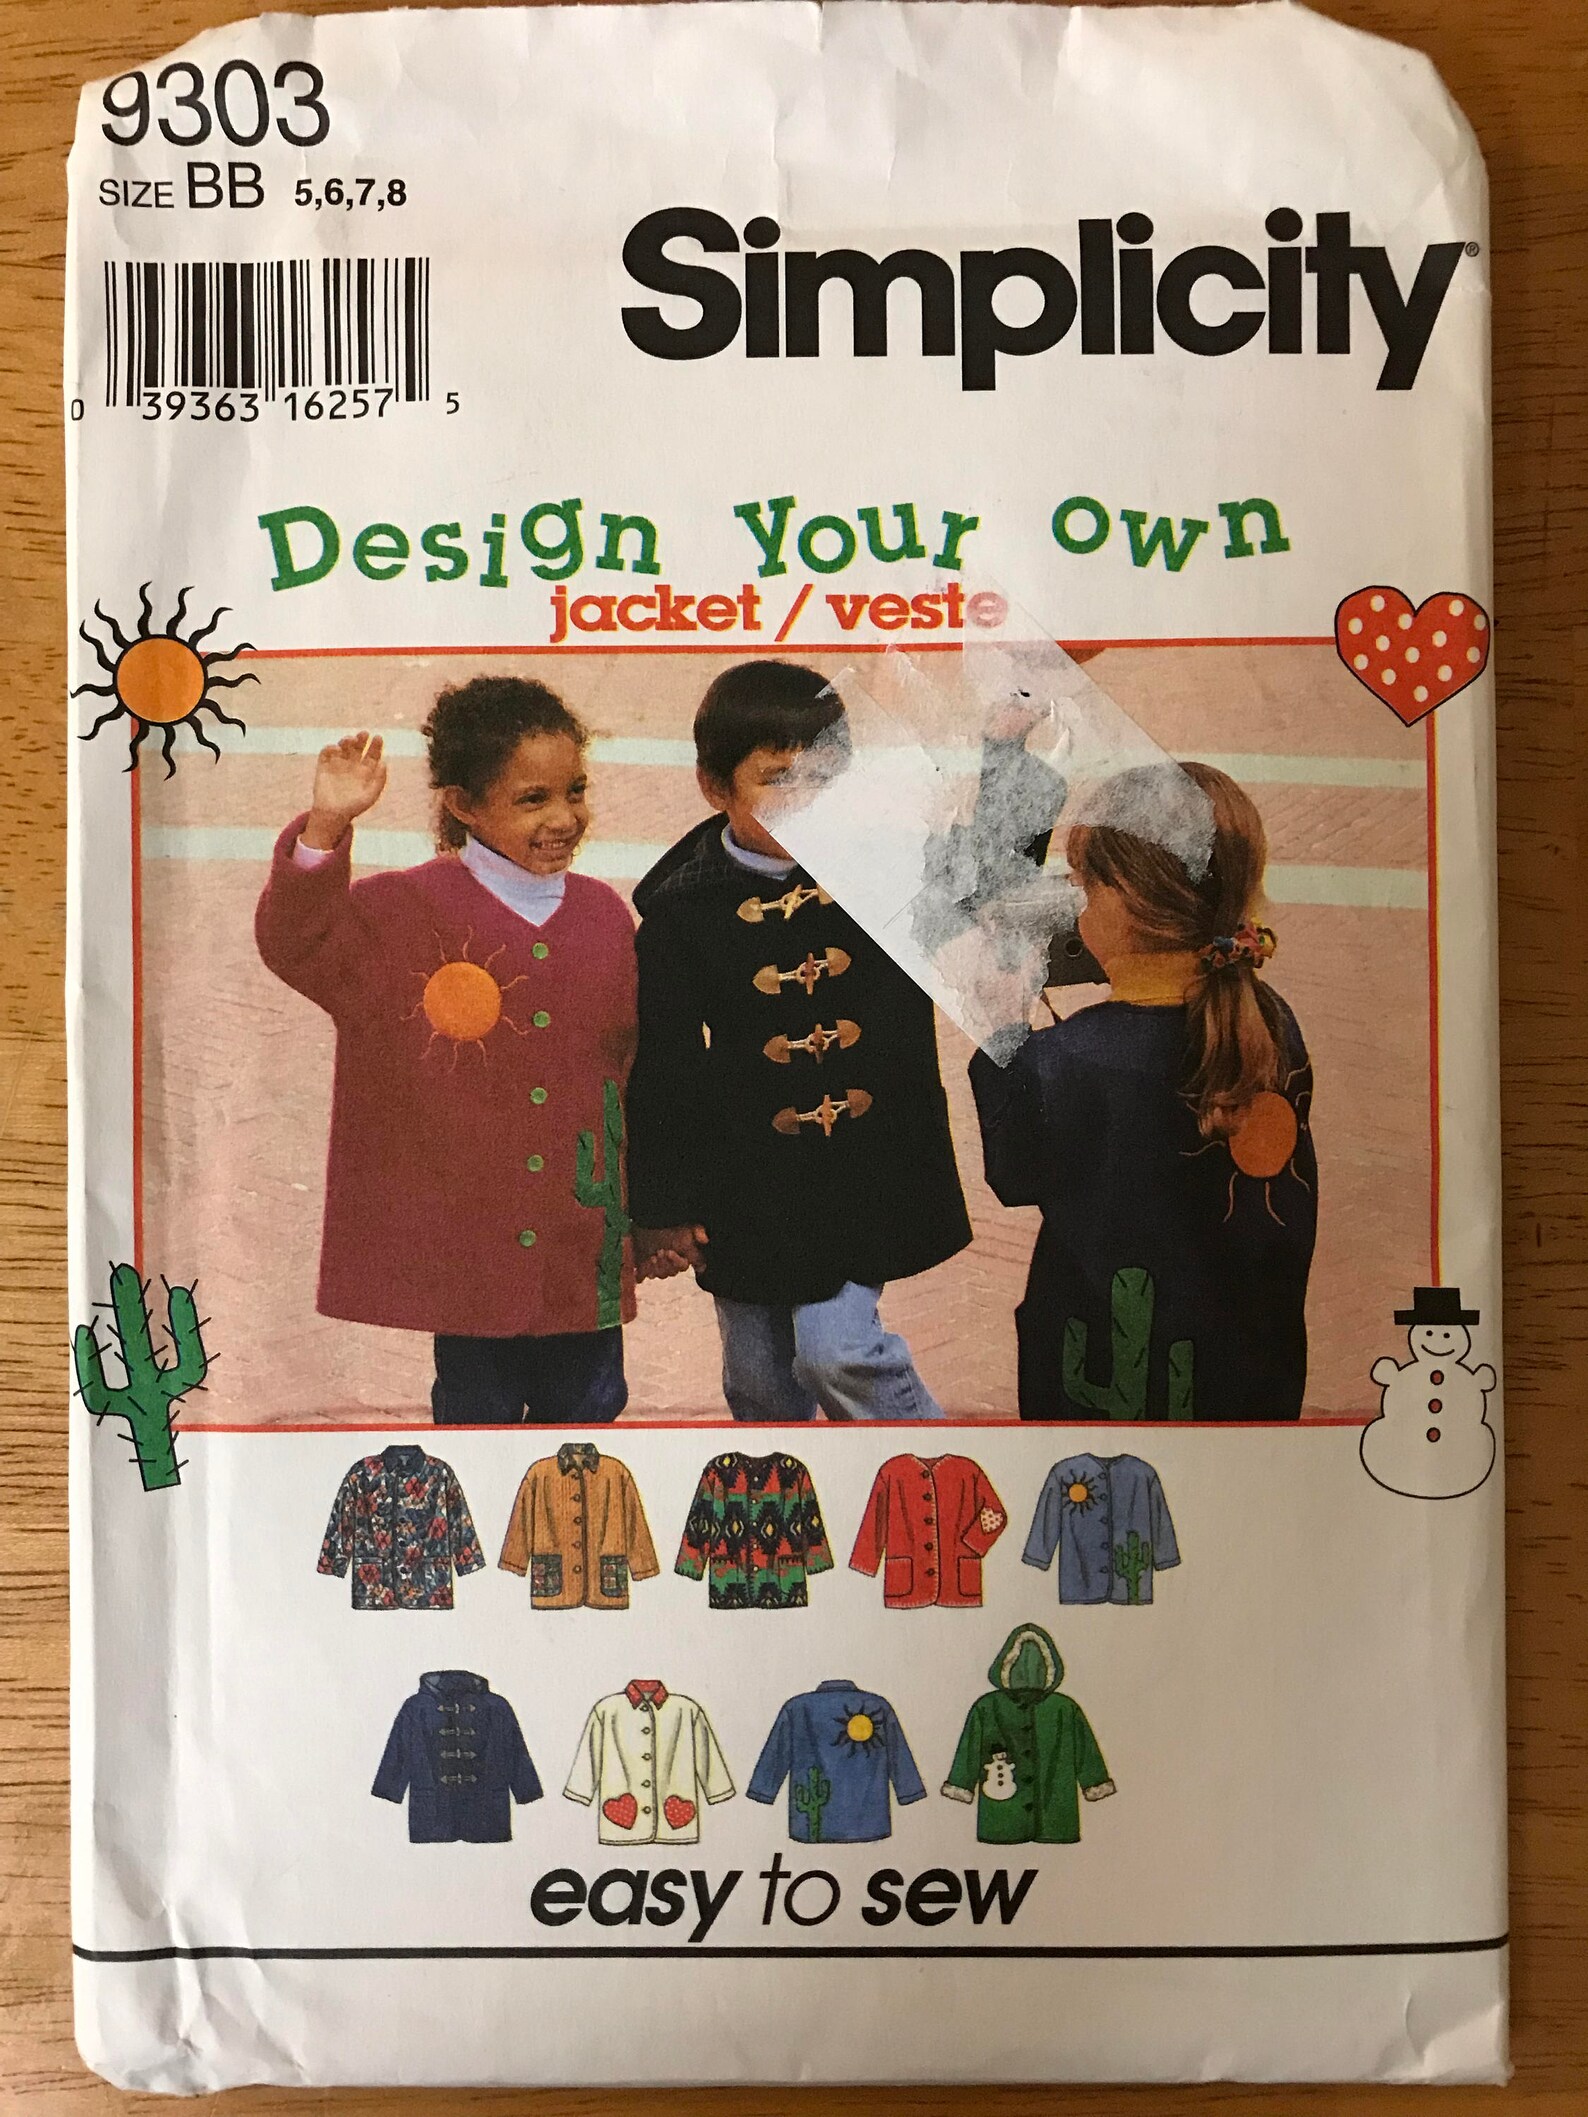 Simplicity 9303 Pattern 1990s Kid's Easy to Sew Jacket | Etsy